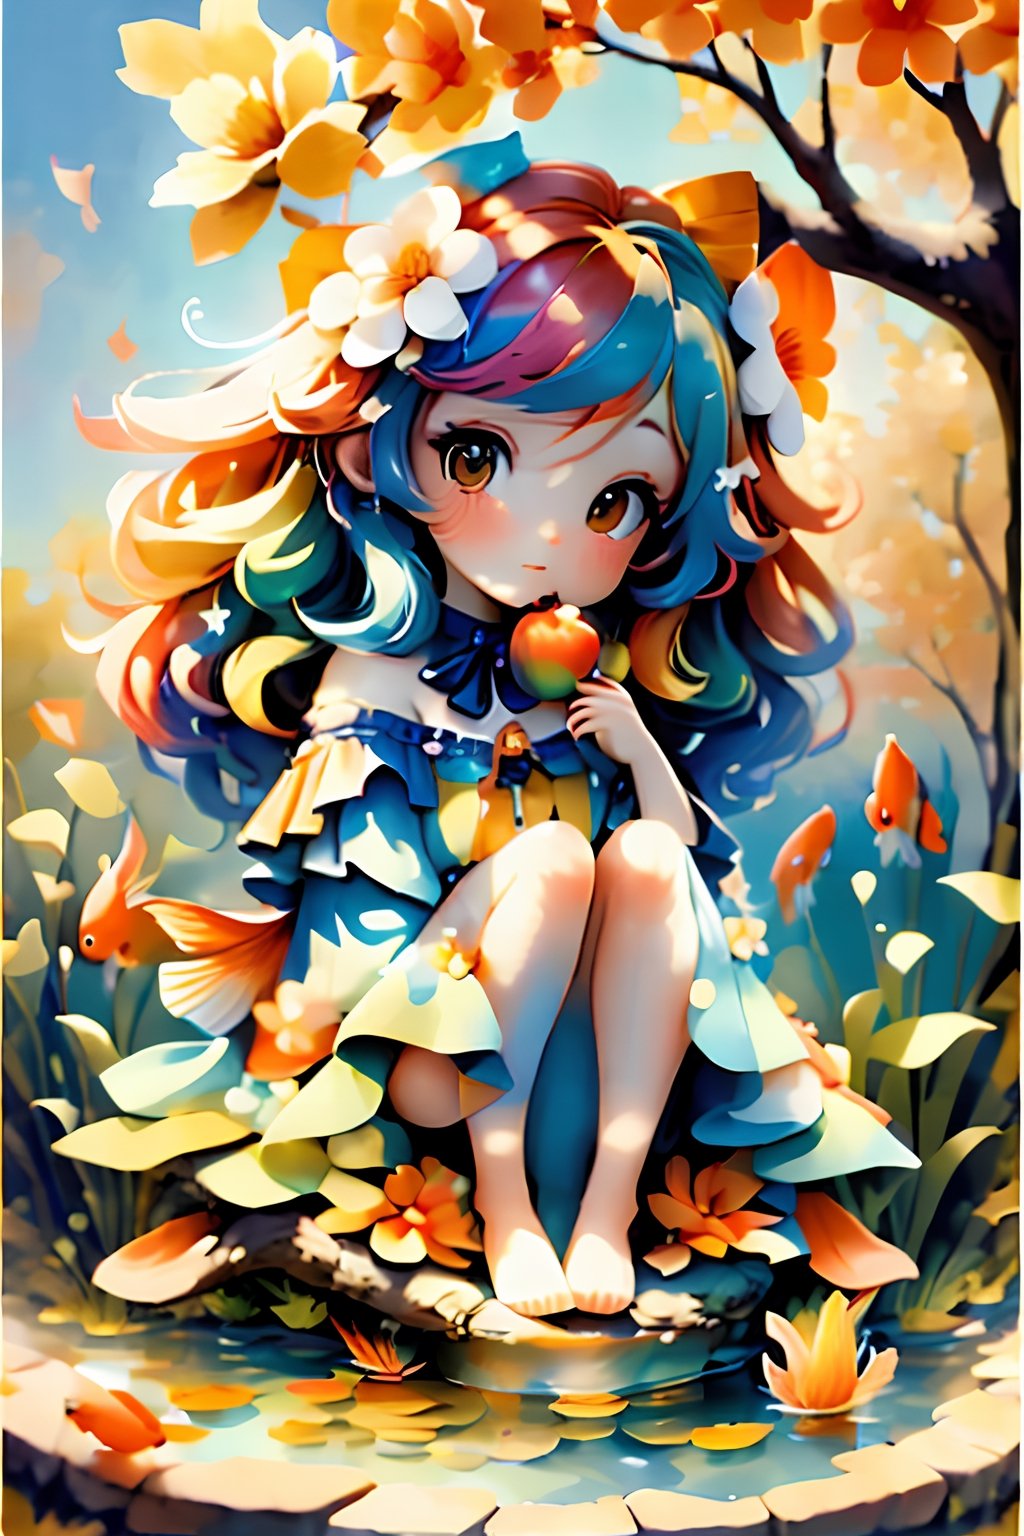  plastican00d, A beautiful woman with colorful hair made from flowers sat on a grassy knoll underneath an apple tree. The sky was blue and the sun shone brightly above her as she watched goldfish swim in a nearby pond